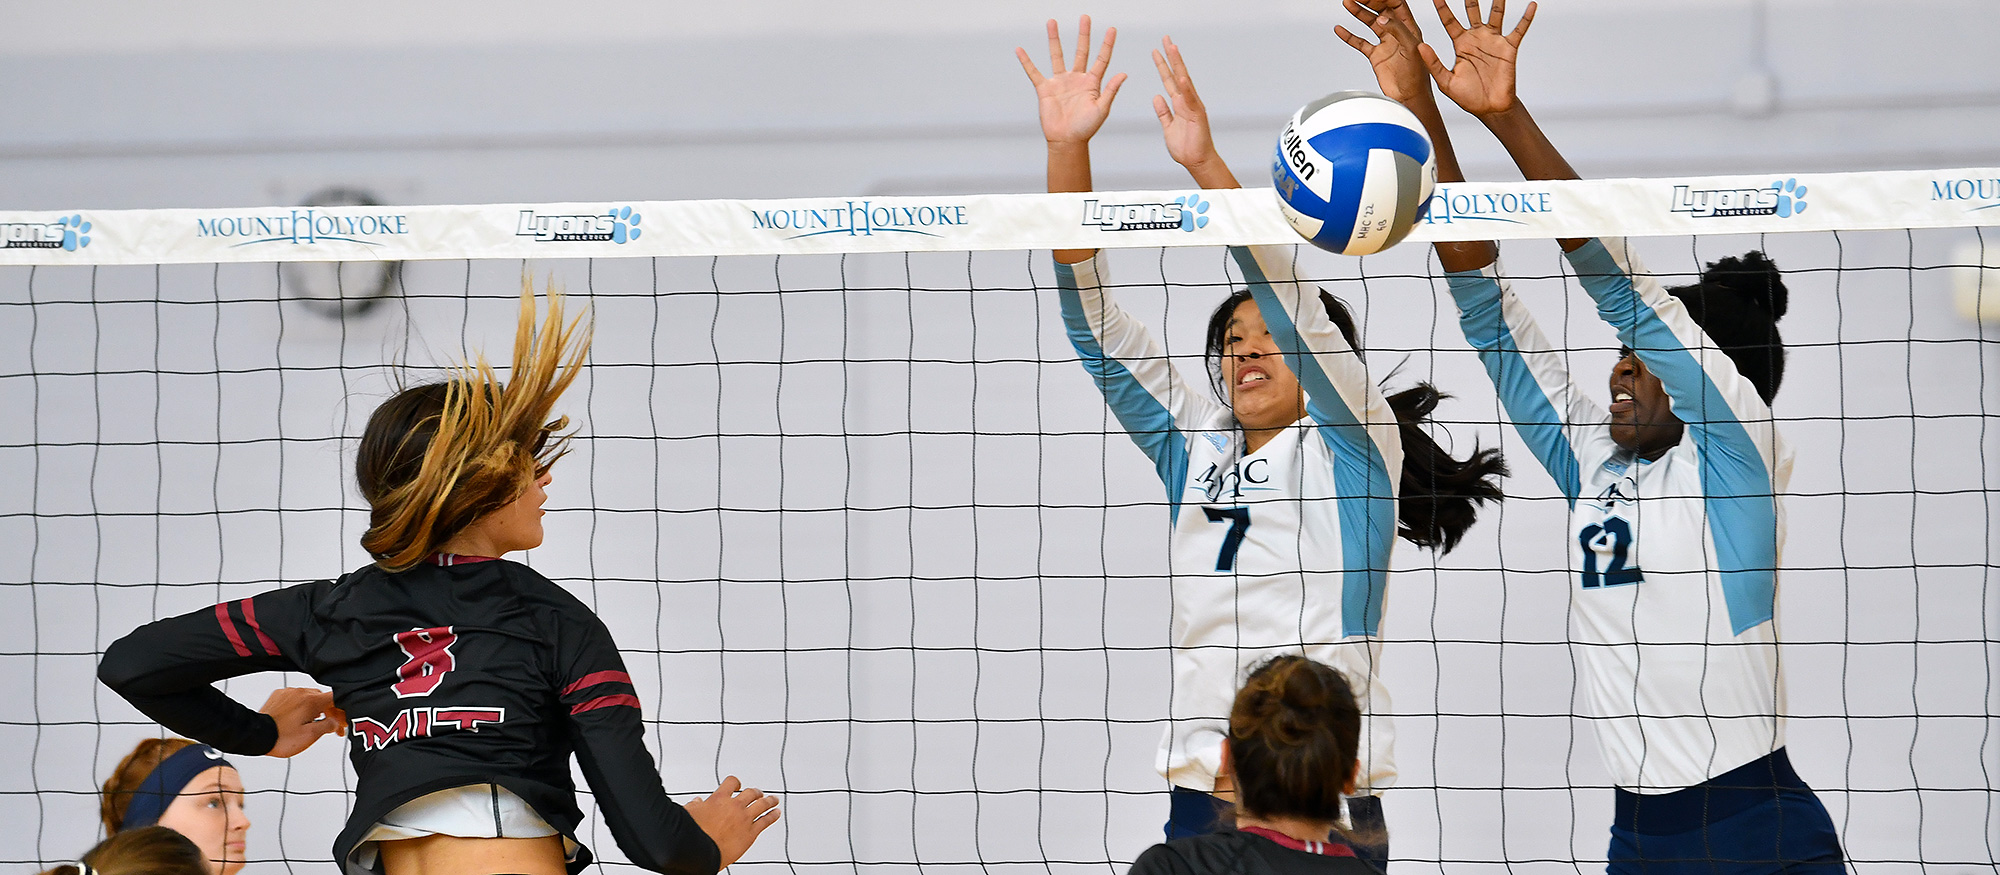 Elle Rimando and Marion Abeja had six and four blocks, respectively, in Mount Holyoke's 3-2 win over Wellesley on Oct. 1, 2022. (RJB Sports file photo)